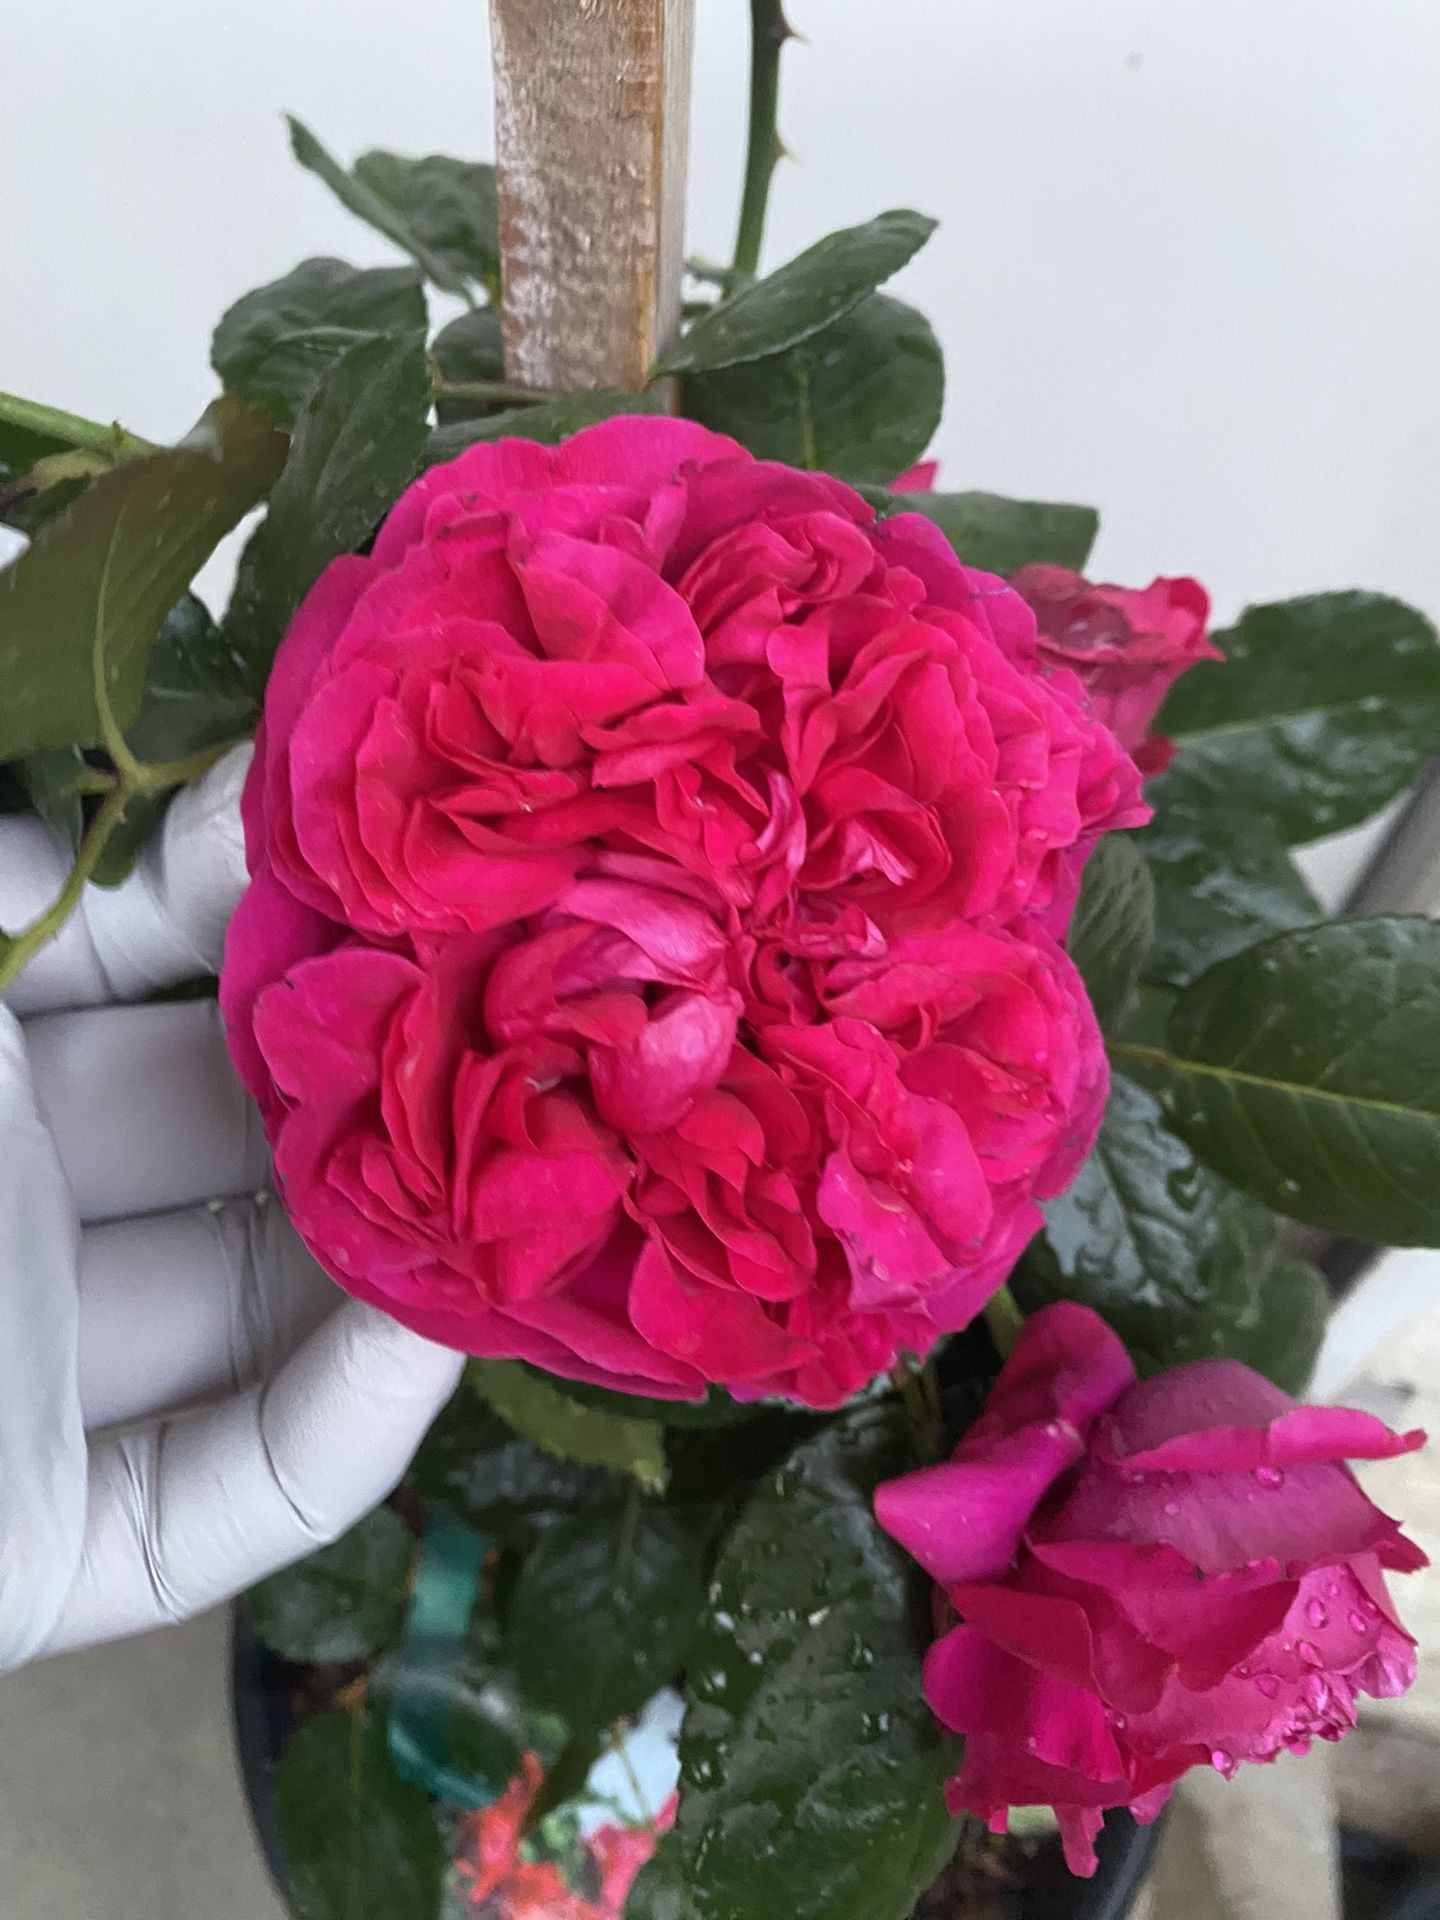 EDÉN CLIMBER ROSE PLANT WITH FLOWERS , In 5 Gallons Pot Pick Up Only